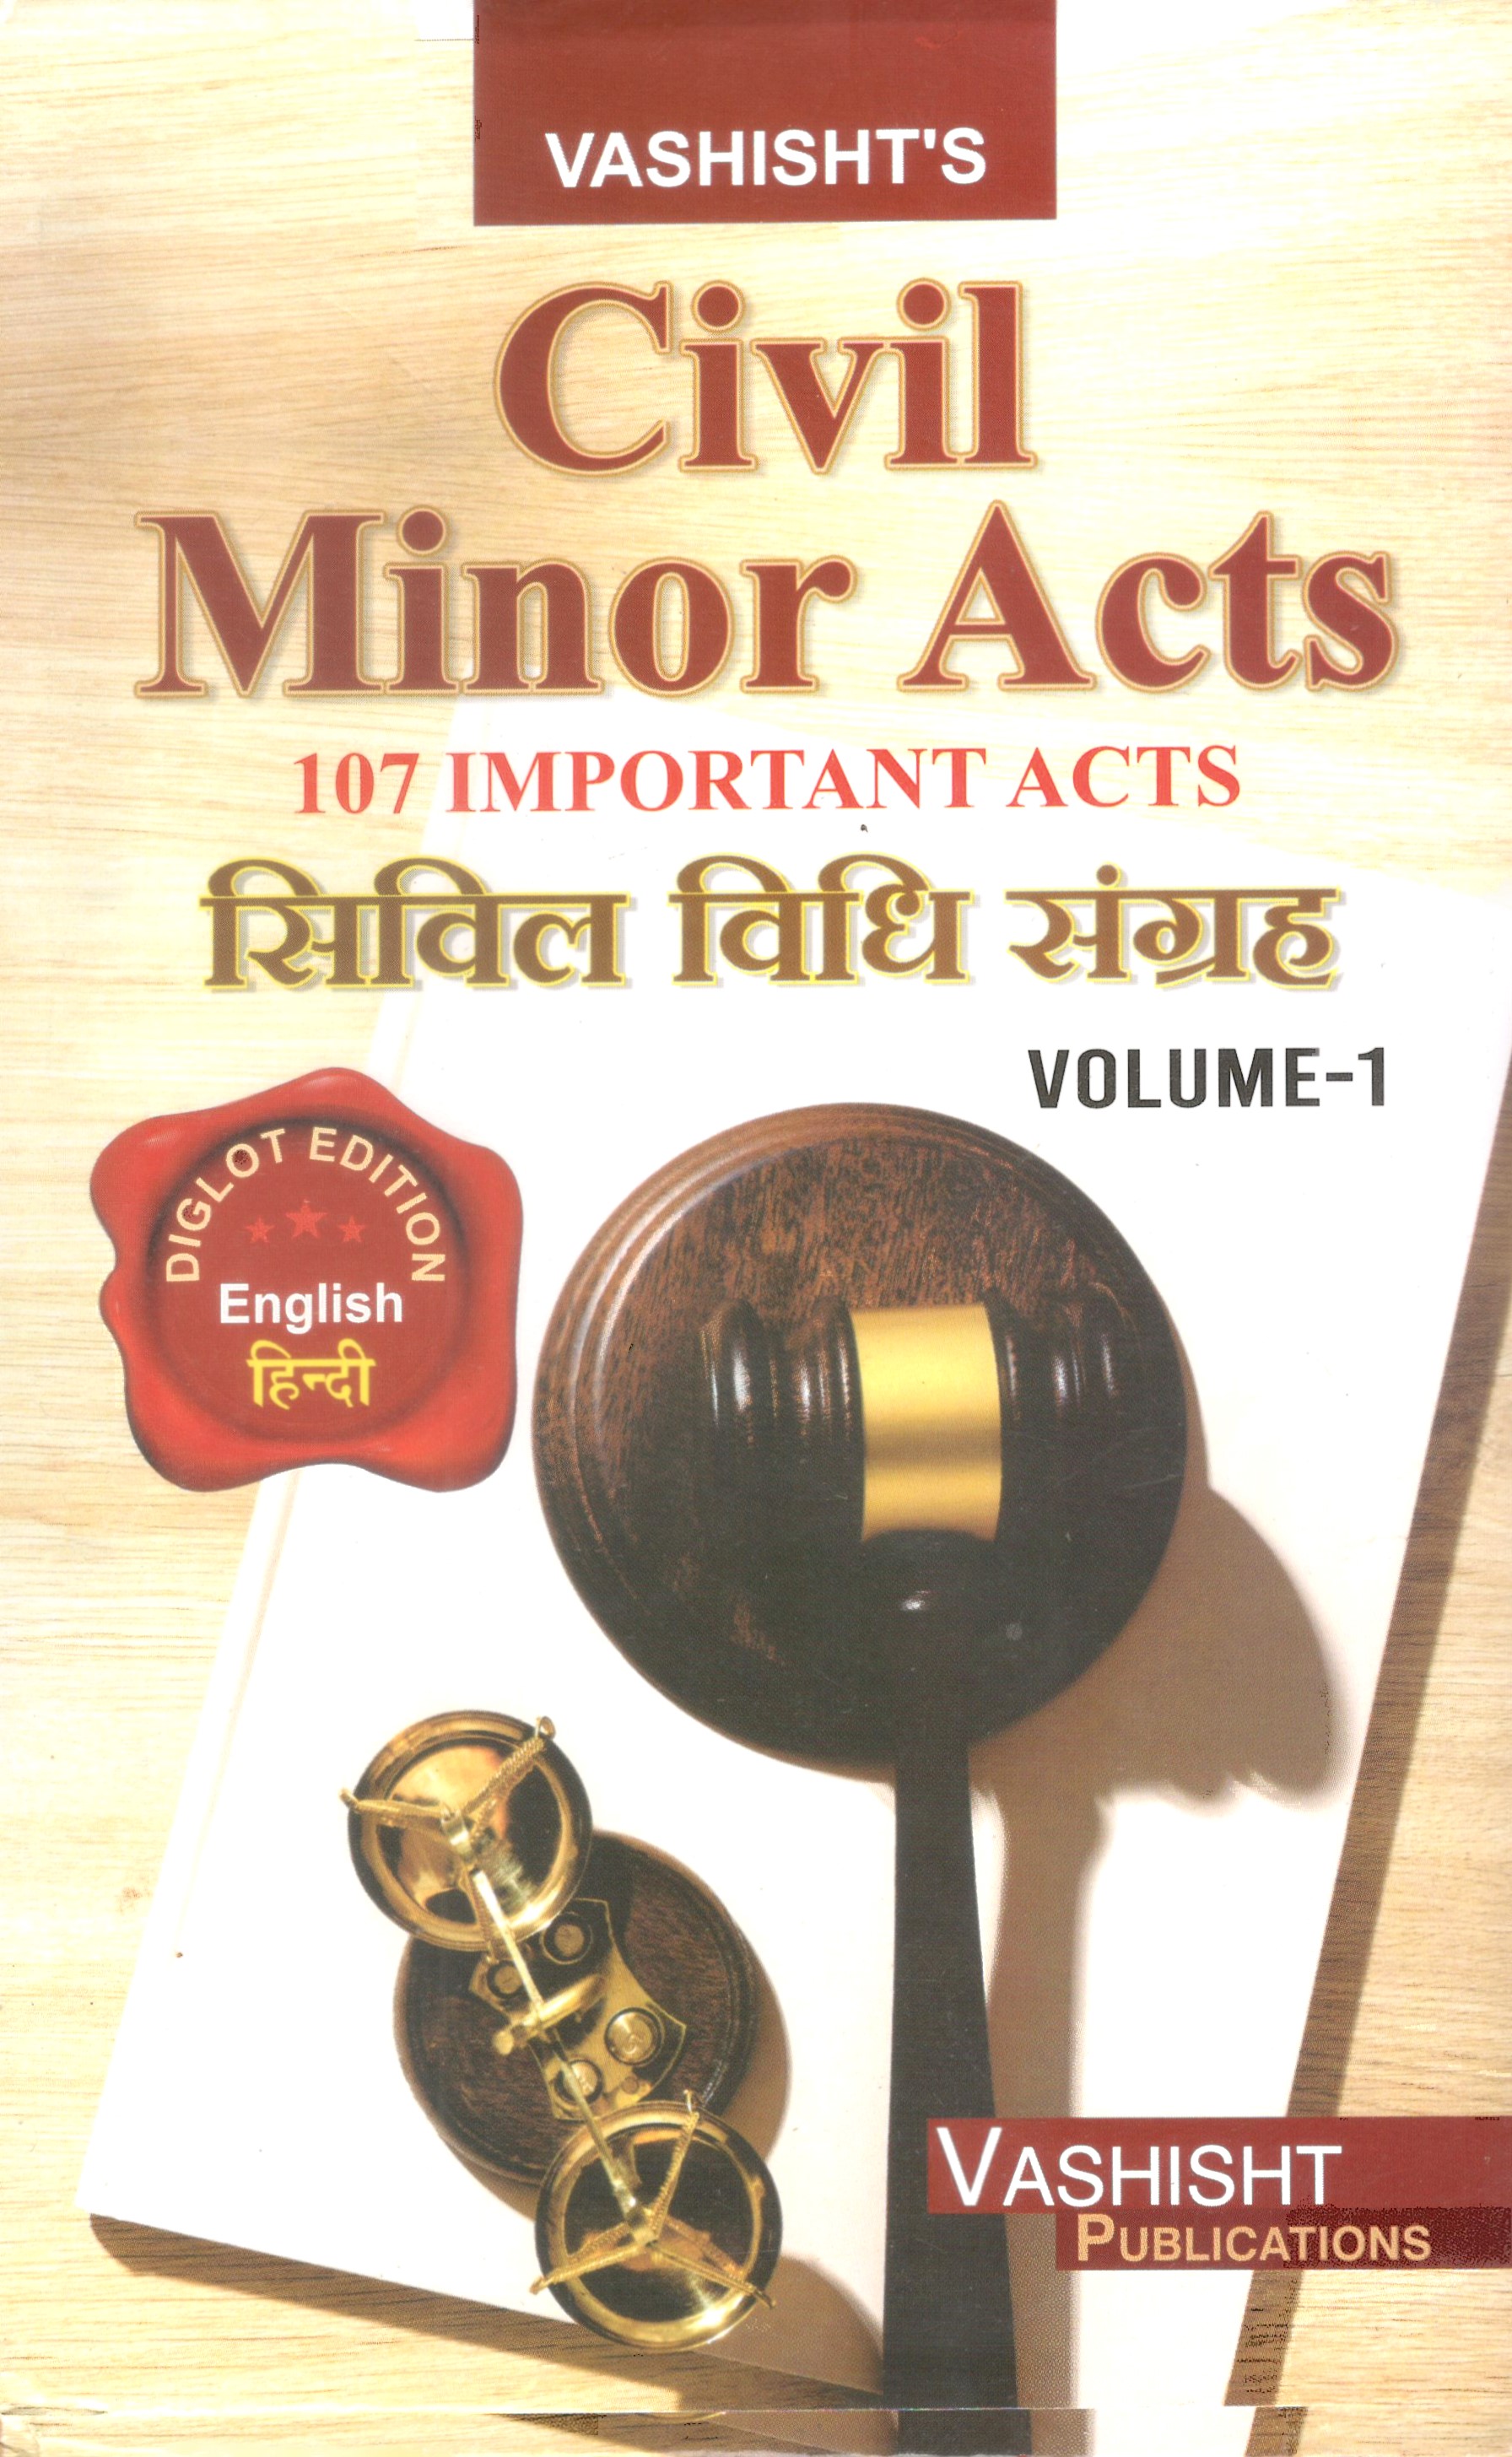  Buy civil Minor Acts / सिविल विधि संग्रह [107 Important Acts in 2 Volumes]